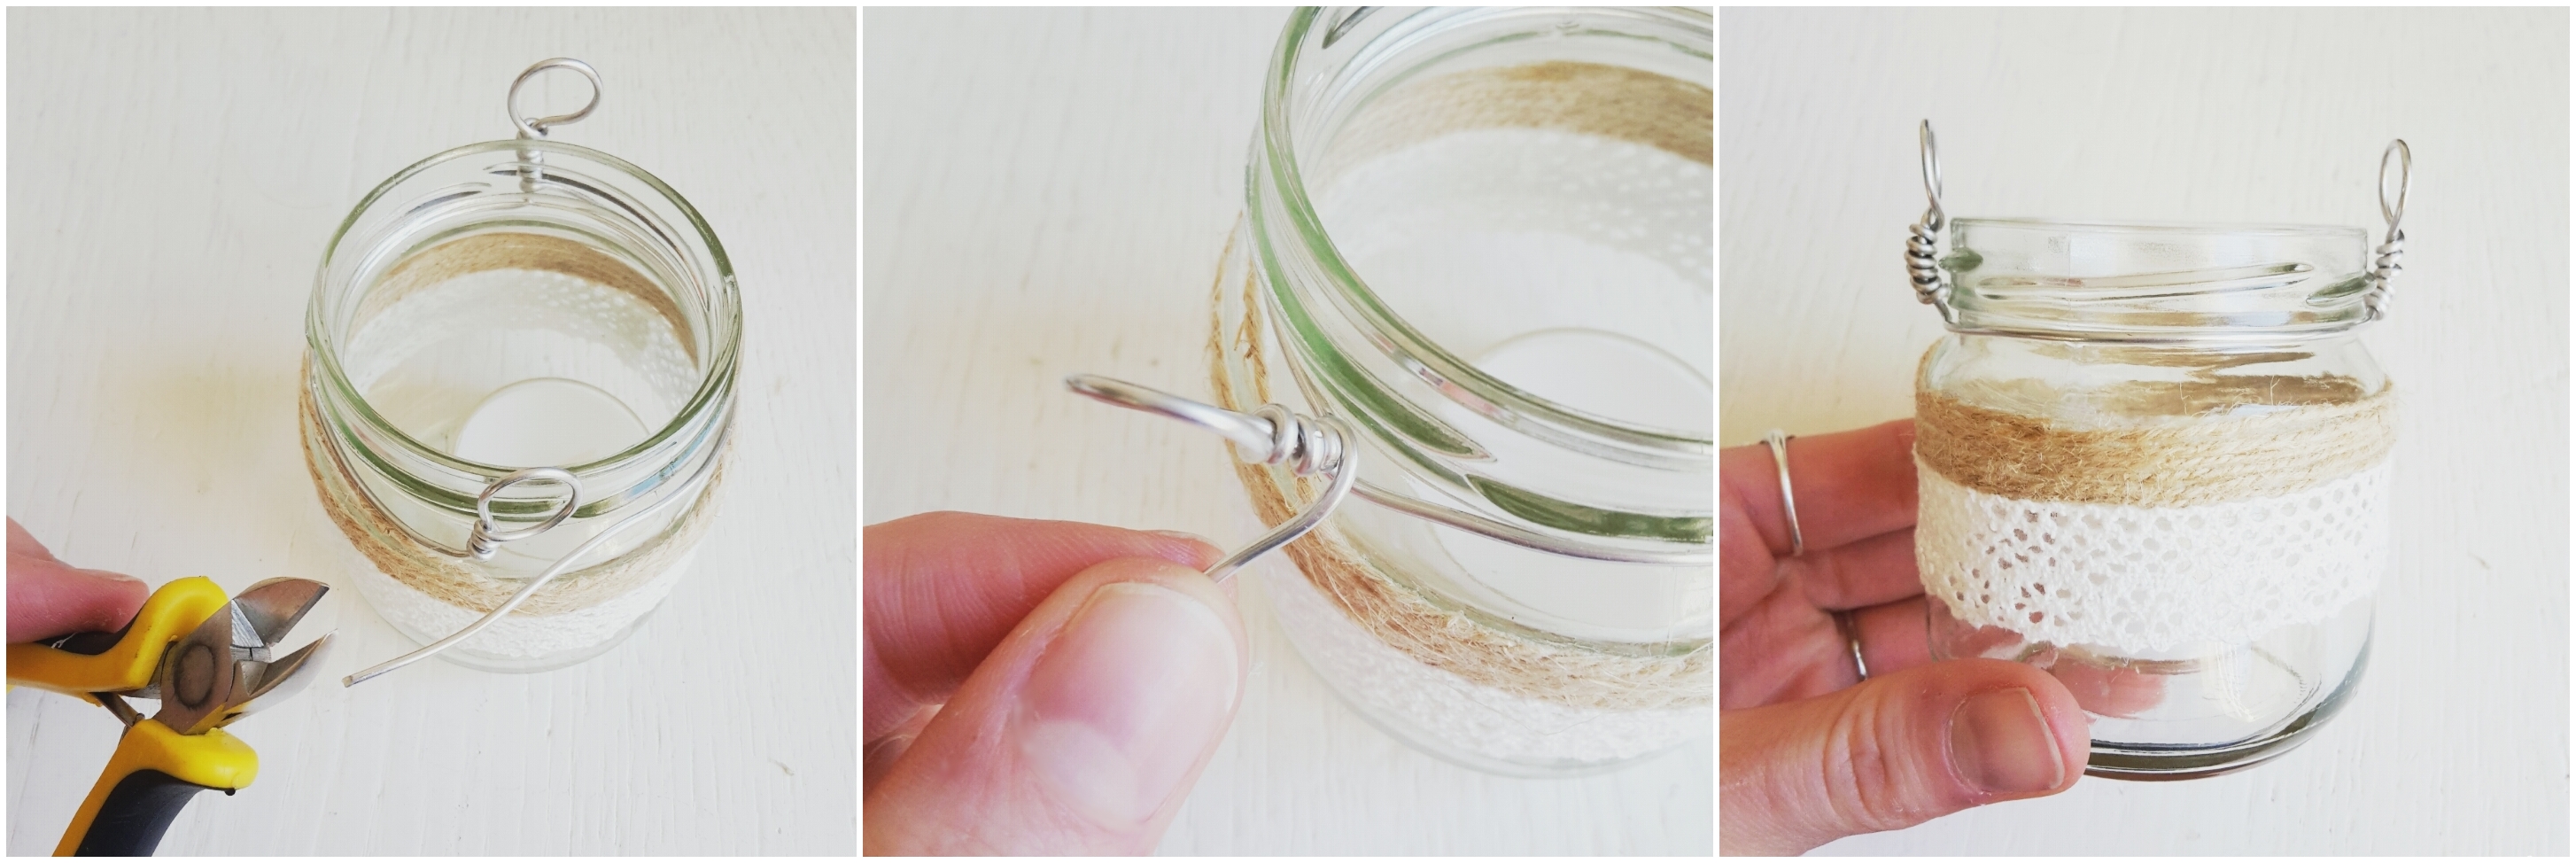 HOW TO HANG UP JARS